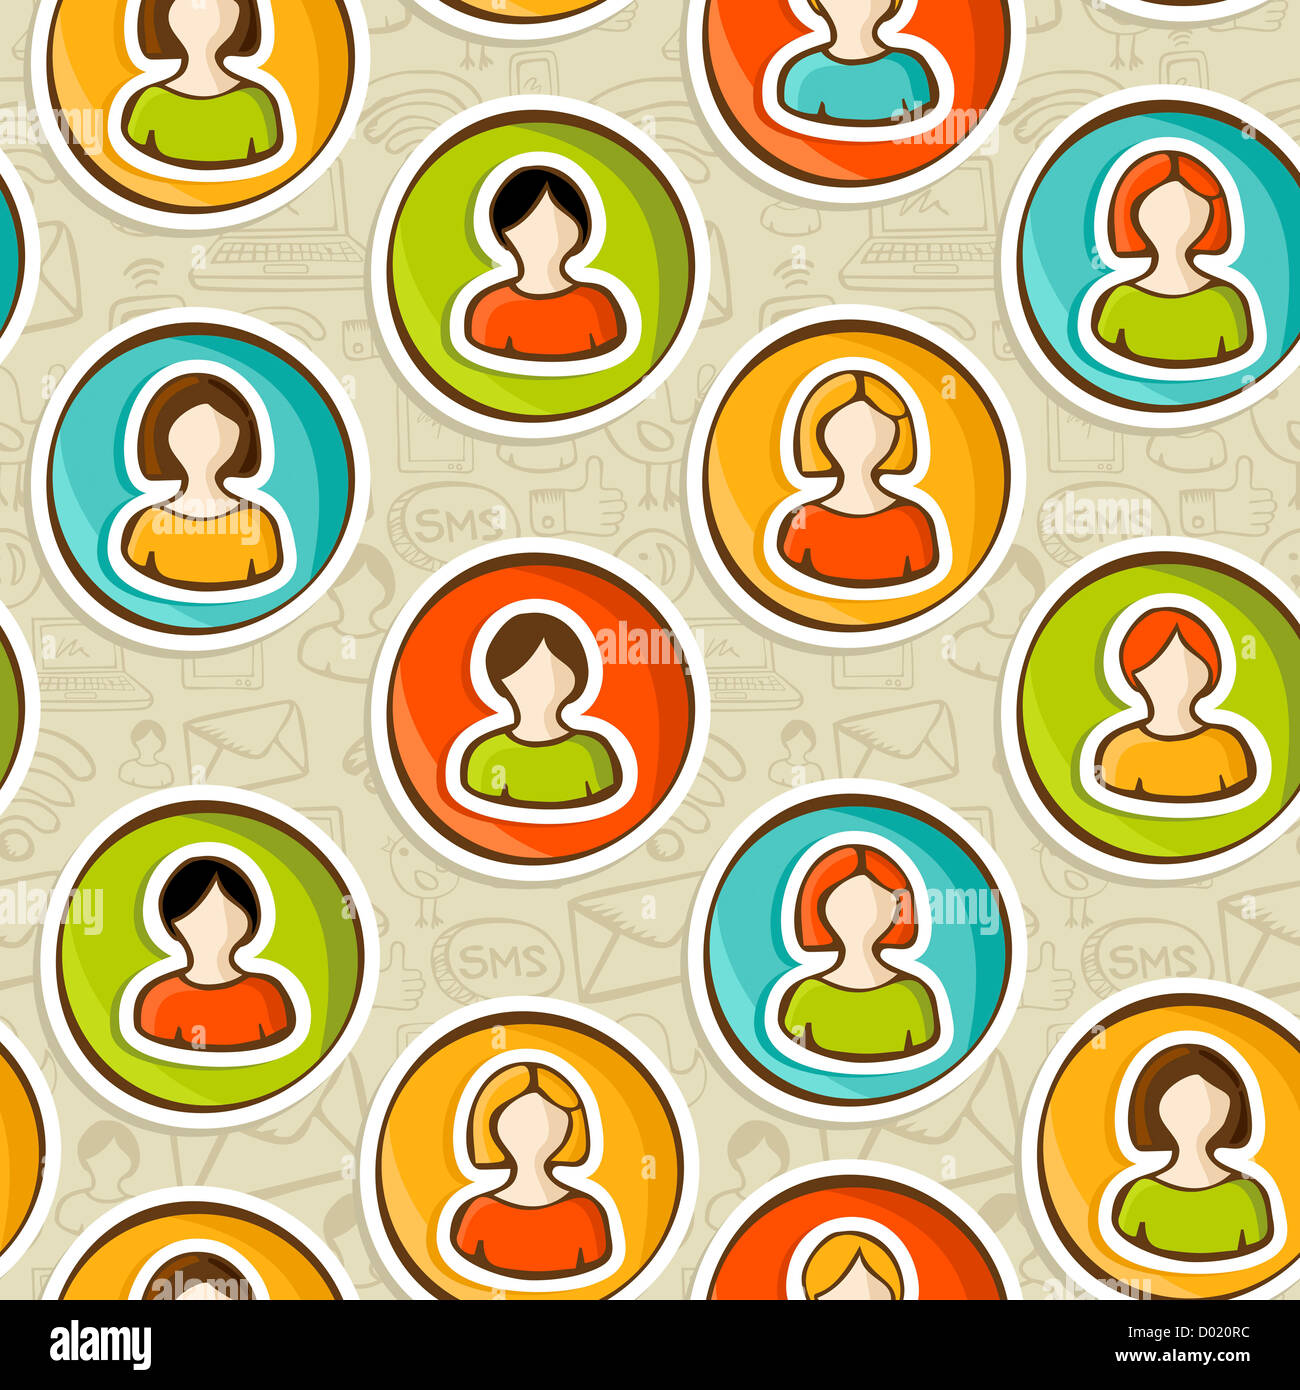 Diversity user people connected to social networks seamless pattern background in sketch style. Vector illustration layered for easy manipulation and custom coloring. Stock Photo